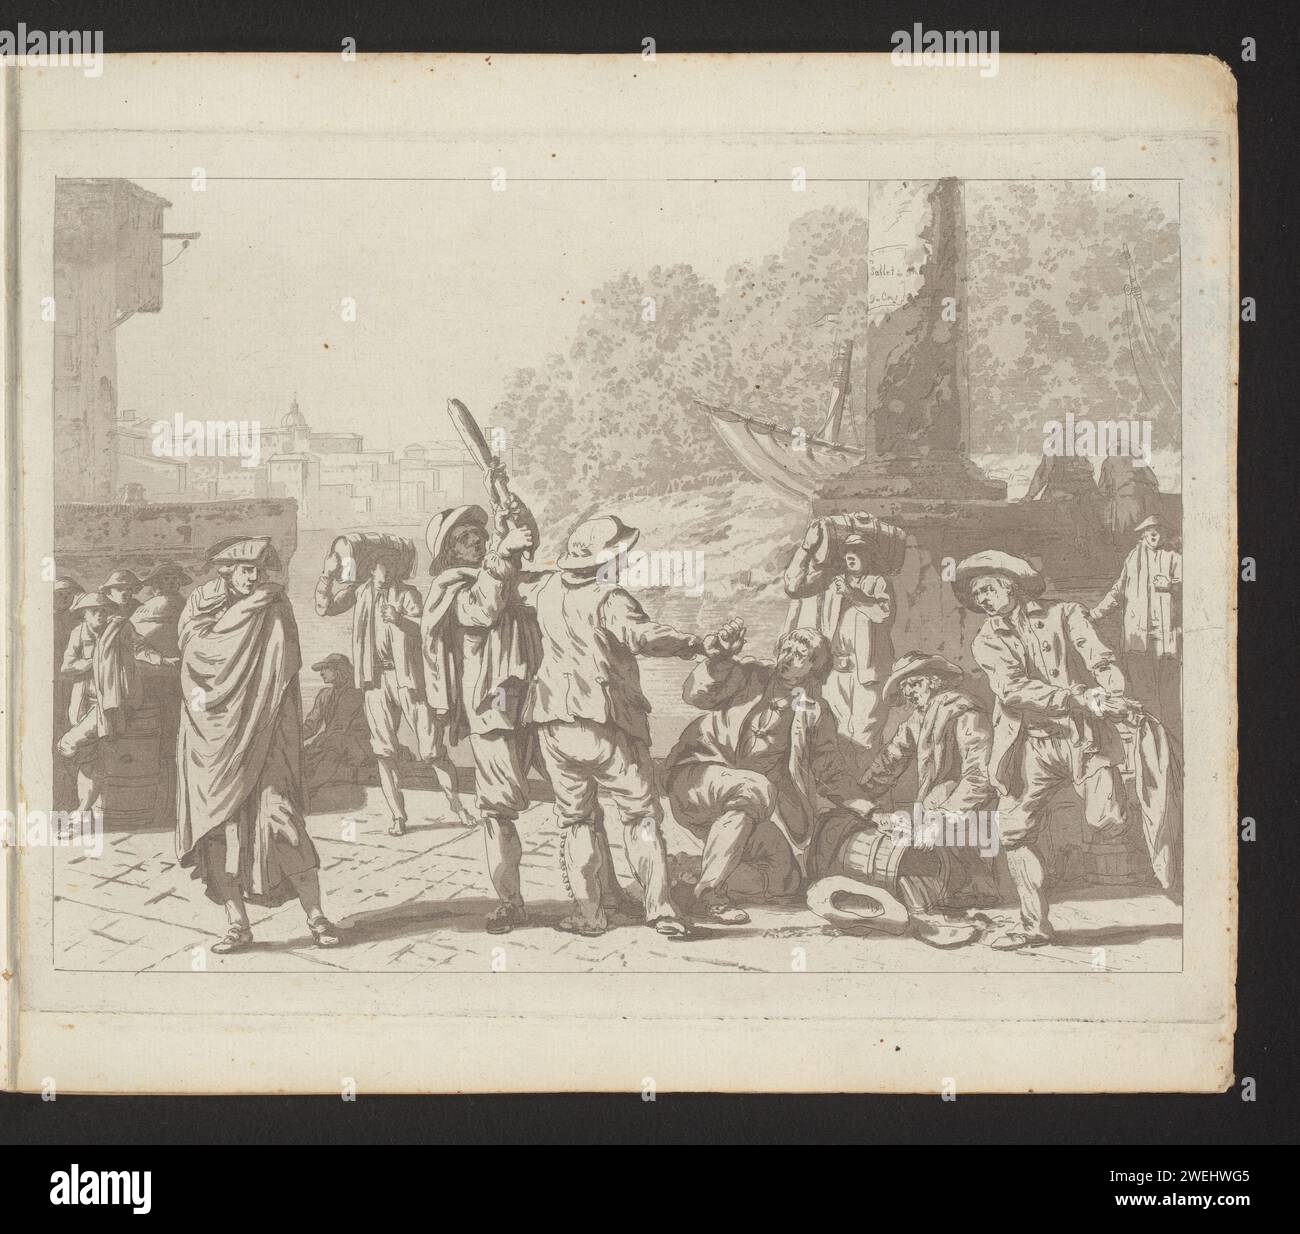 Shopping on a square, Louis Ducros, after Jacques Sablet (II), 1758 - 1810 print Print is part of an album.  paper etching Europeans (with NAME). quarrel, argument. weapons for striking a blow: club Stock Photo